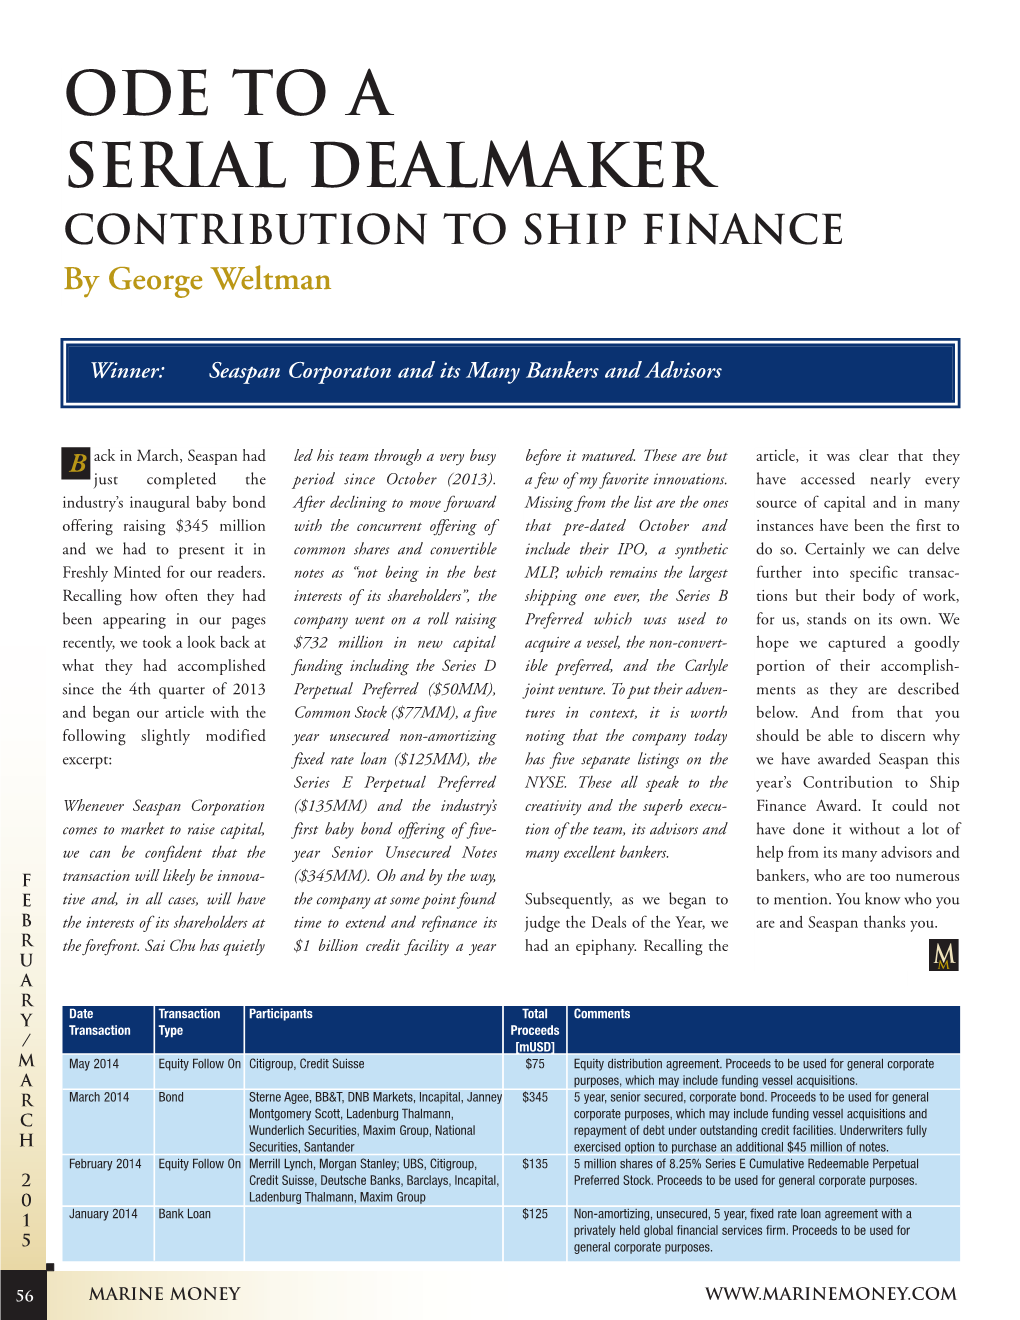 Ode to a Serial Dealmaker Contribution to Ship Finance by George Weltman